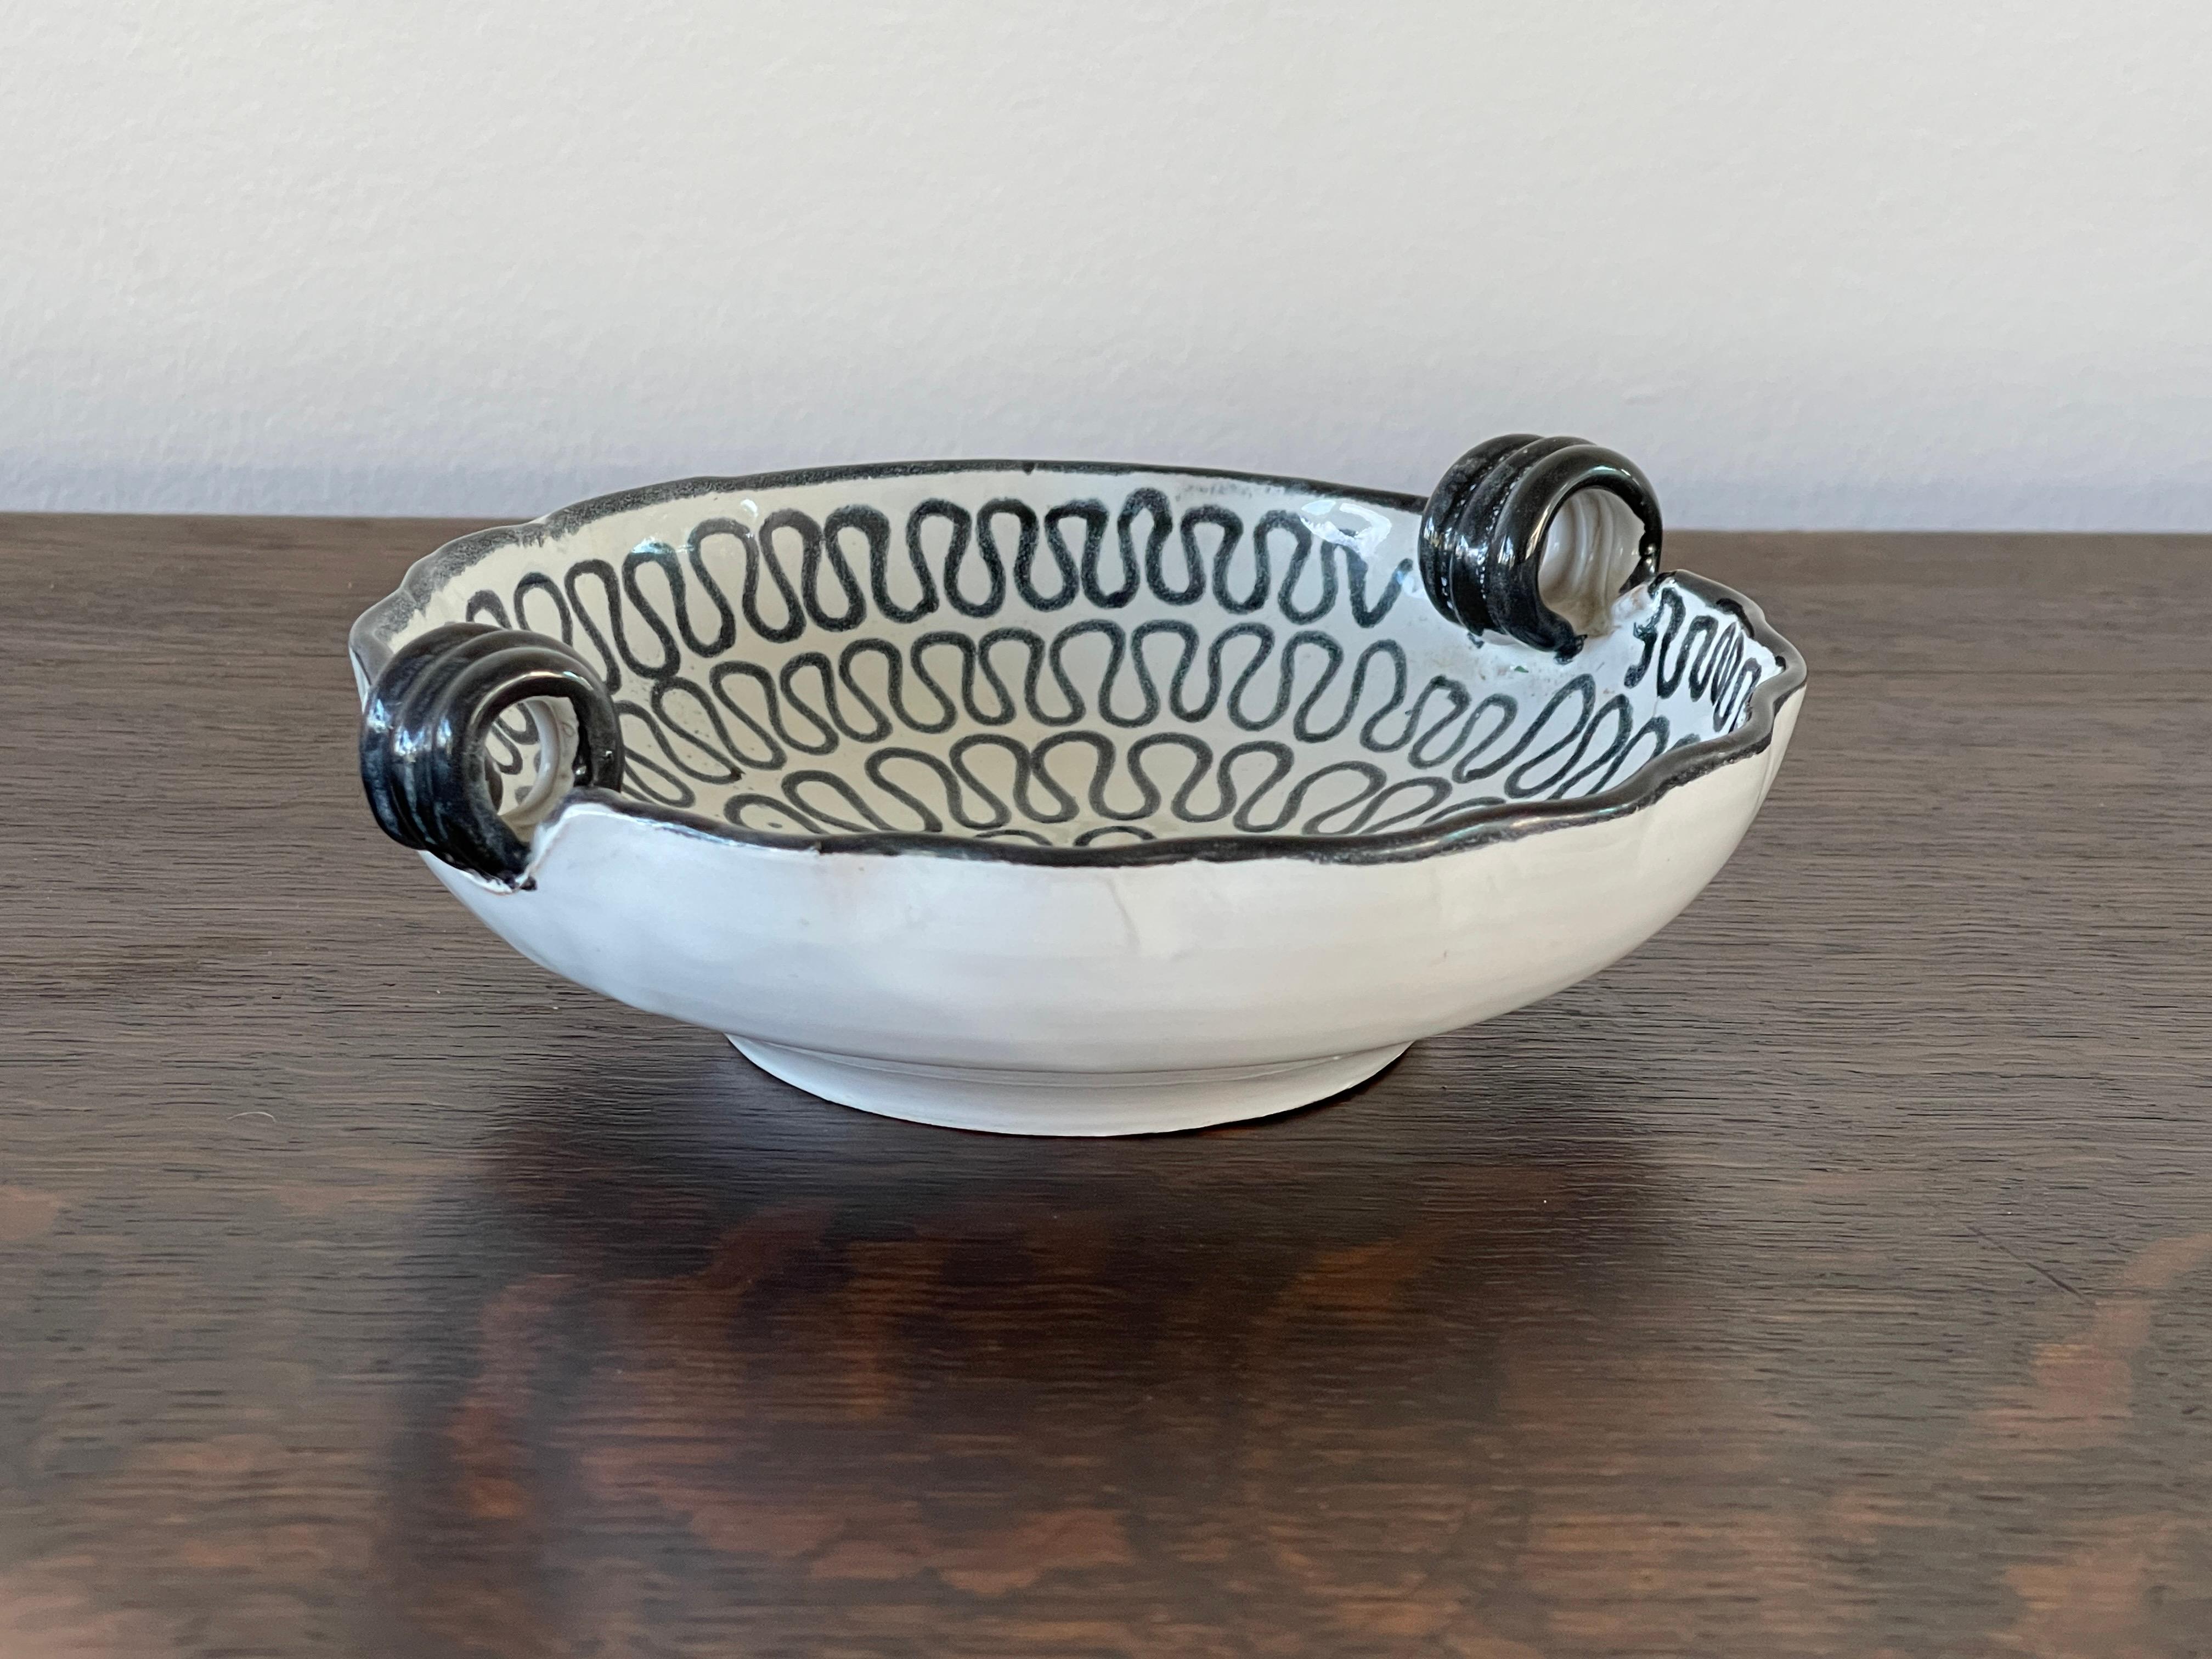 Petite sculptural Italian ceramic bowl with scalloped edges and black and white graphics.